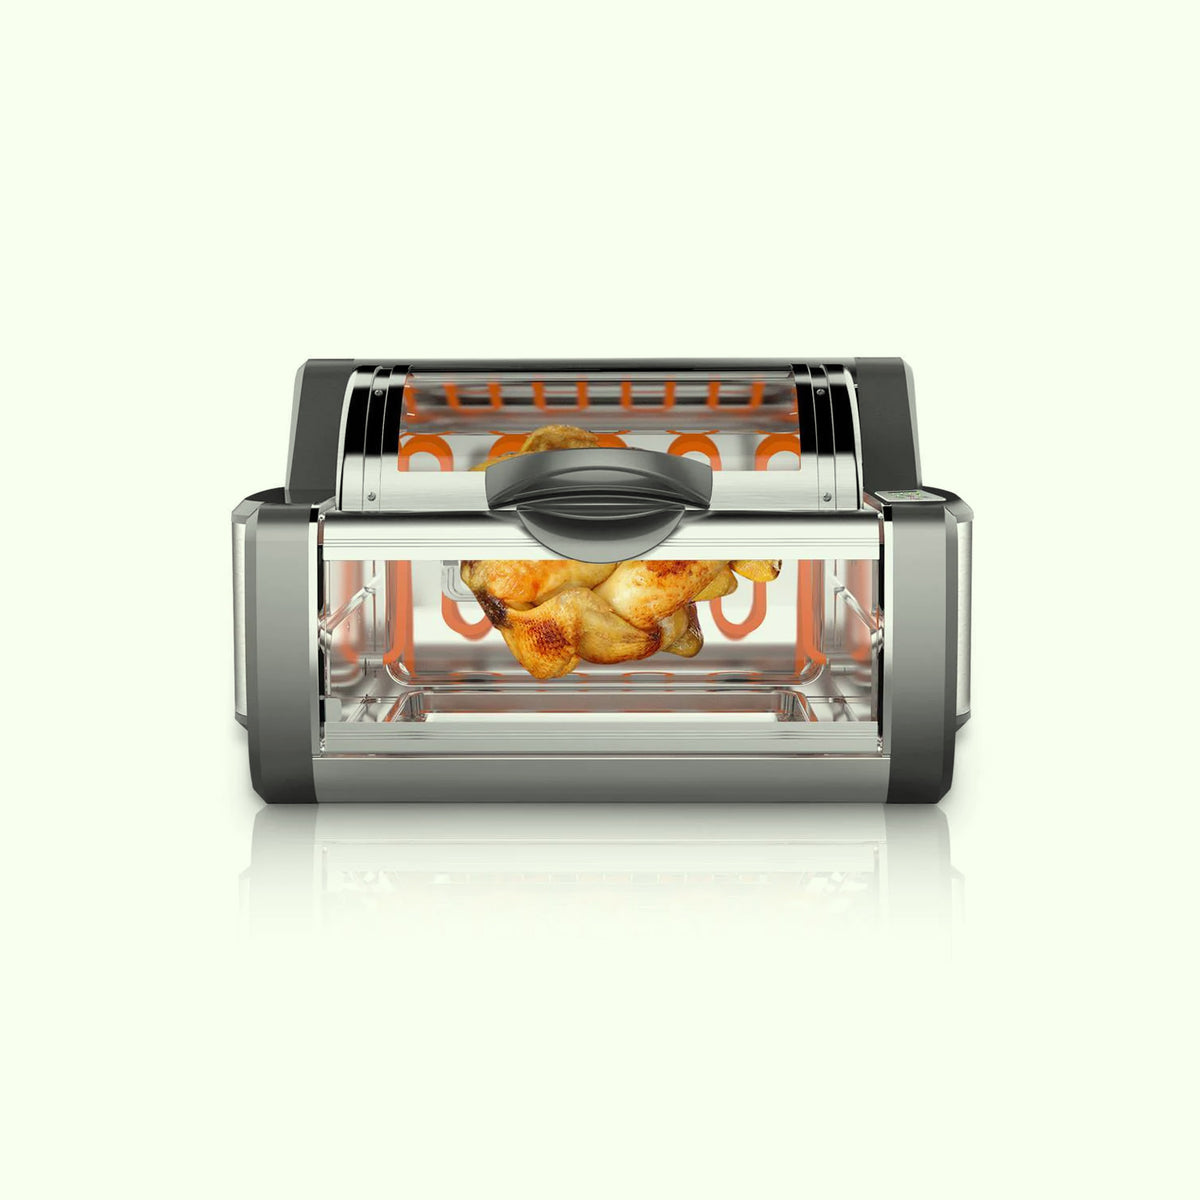 Nutrichef Kitchen Convection Electric Countertop Rotisserie Toaster Oven Cooker with Food Warming Hot Plates, 30+ Quart (AZPKRTO28)